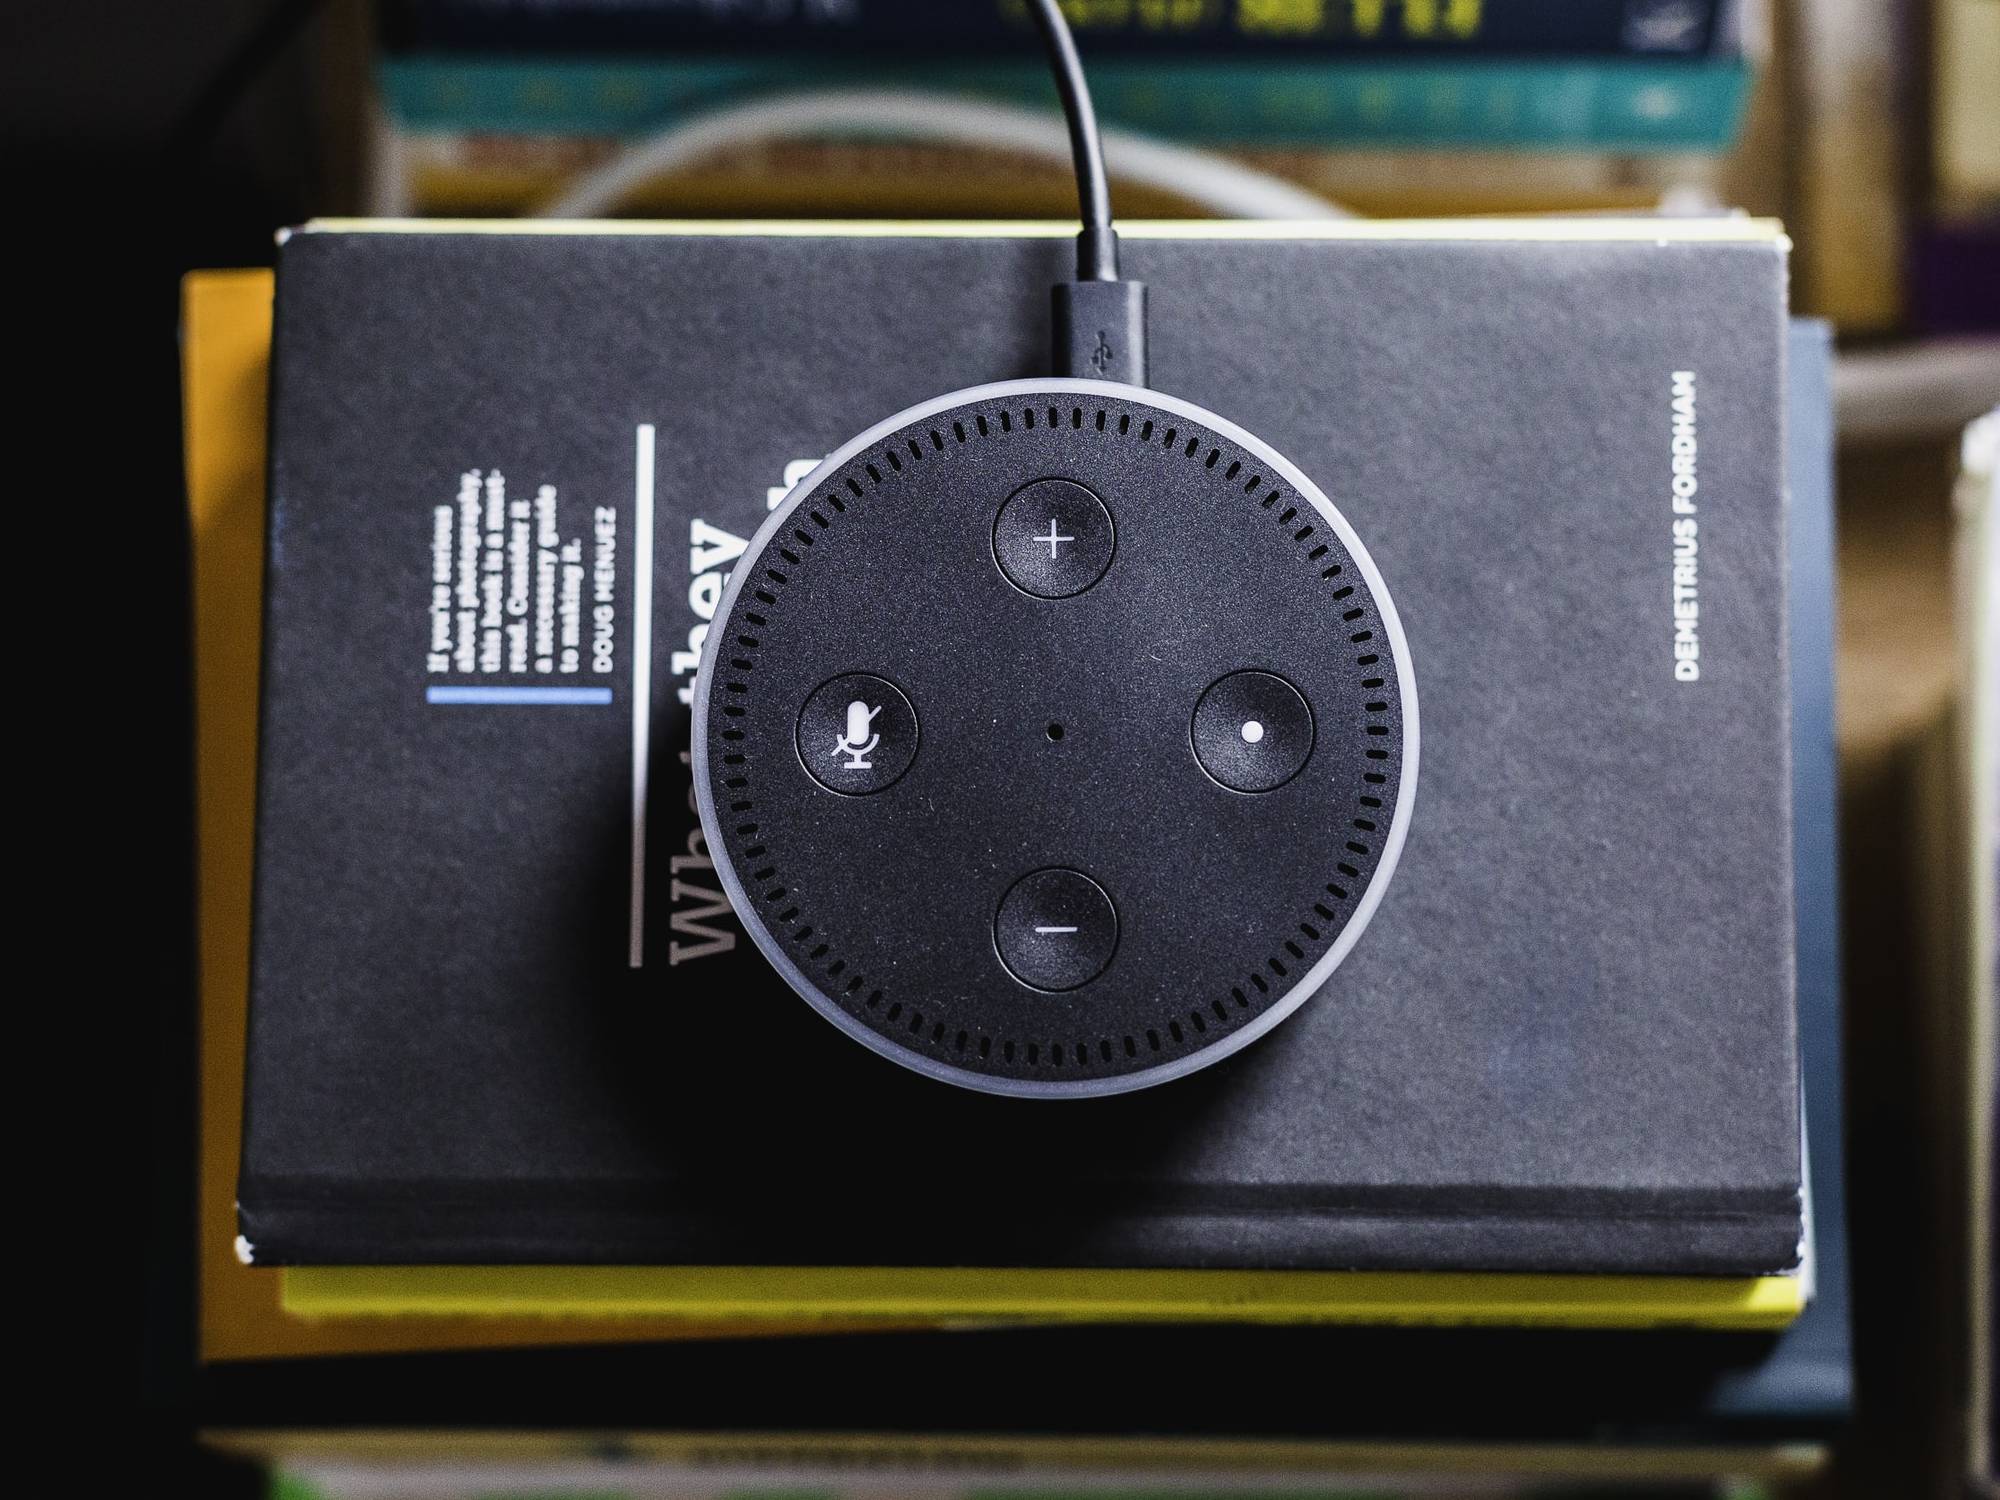 An Amazon Echo on top of a stack of books.